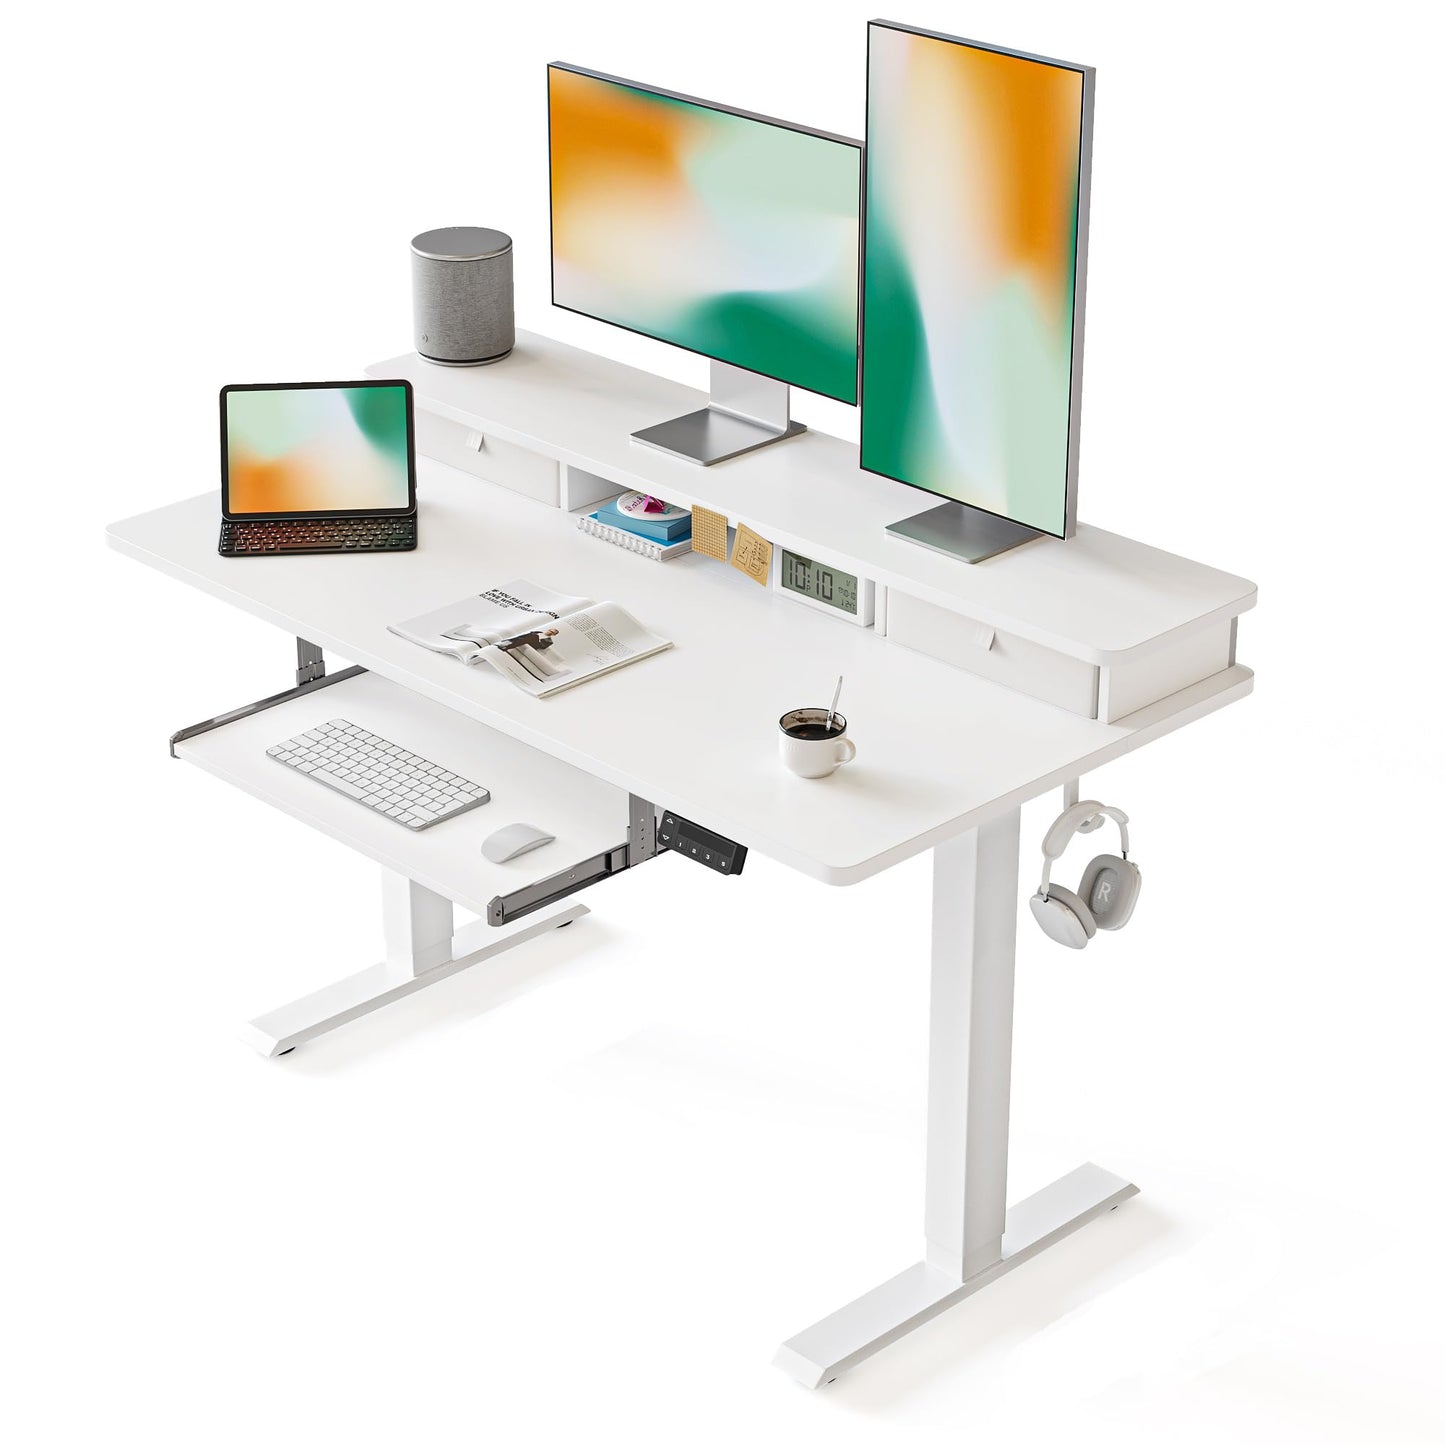 FEZIBO Standing Desk with Drawers, Adjustable Height Desk with Keyboard Tray, Stand Up Desk with Storage Shelf, 48 x 24 Inchs, White Top